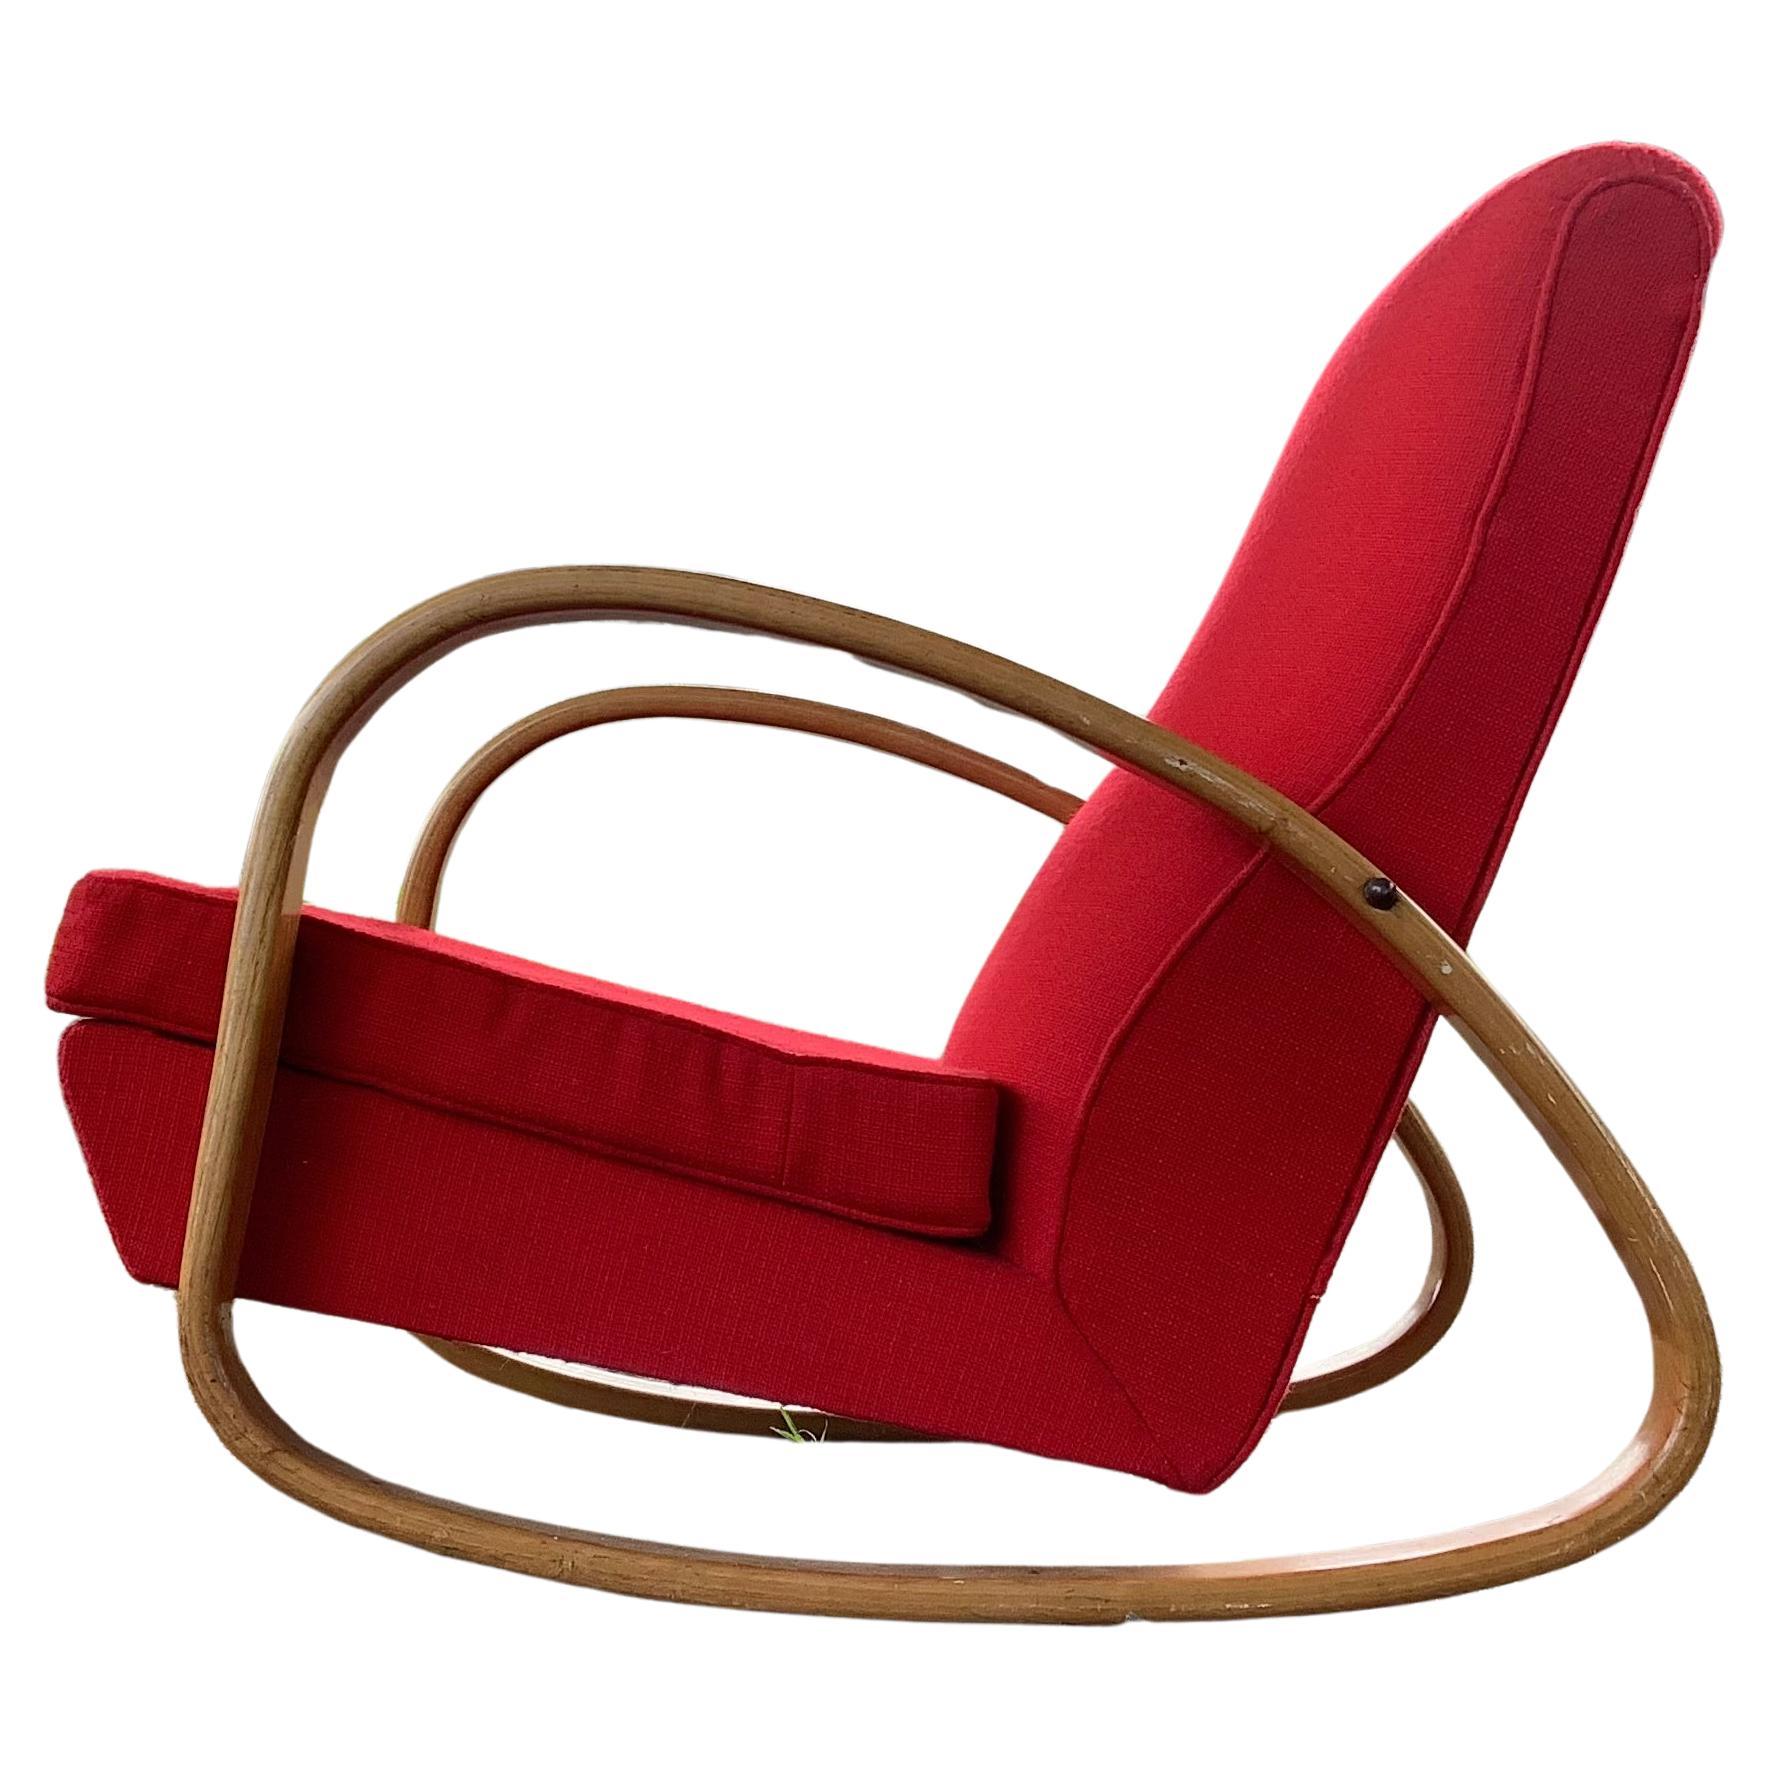 1960's midcentury modern French rocking chair For Sale